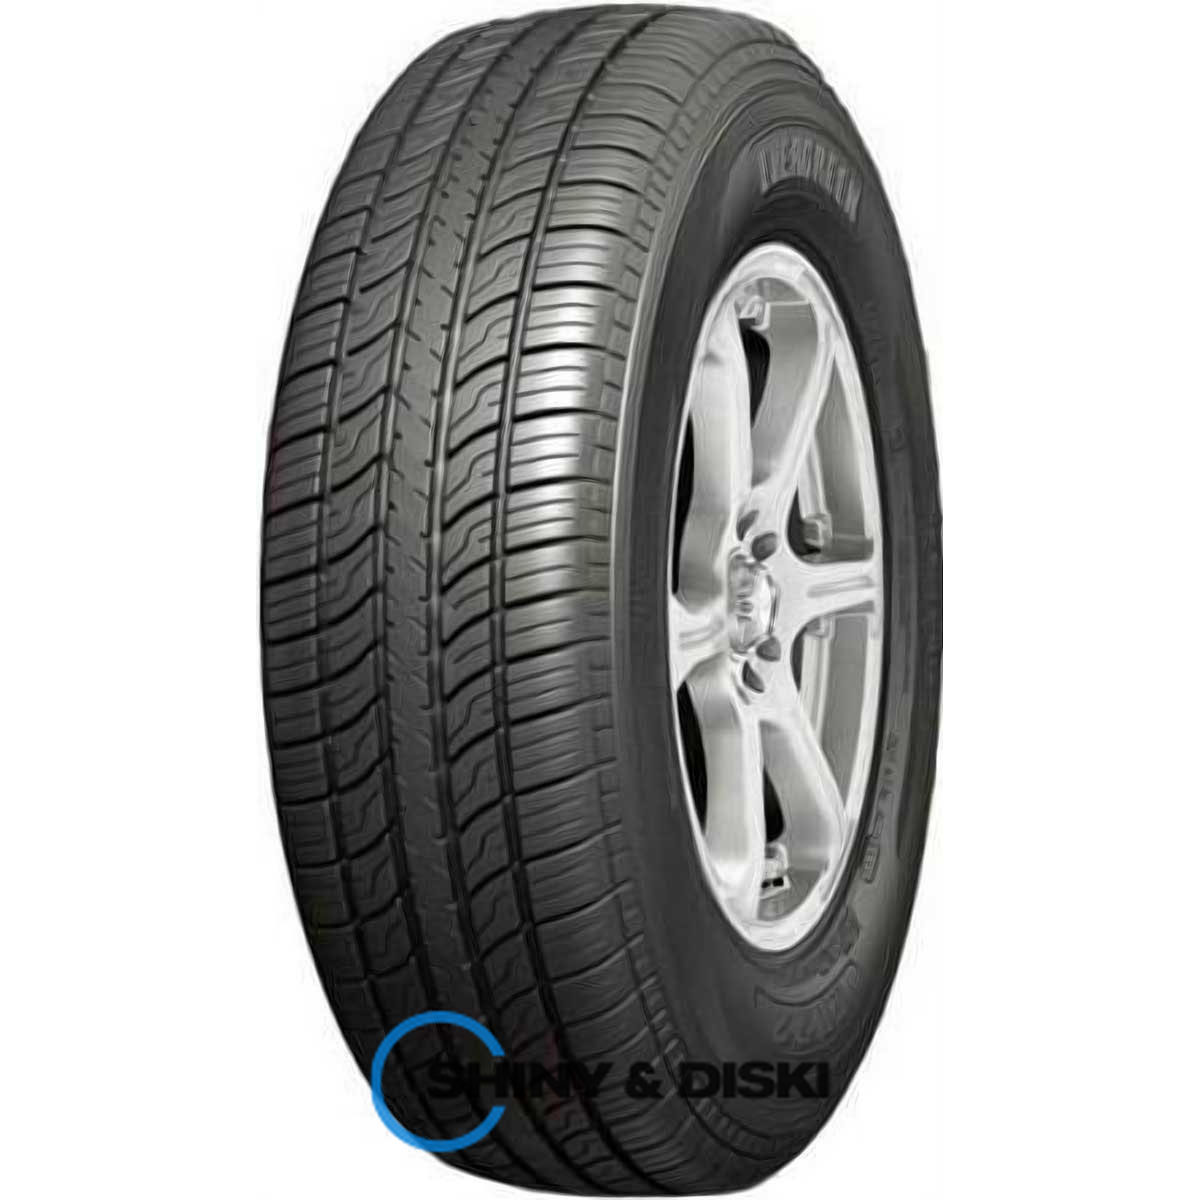 evergreen eh22 165/70 r14 81t